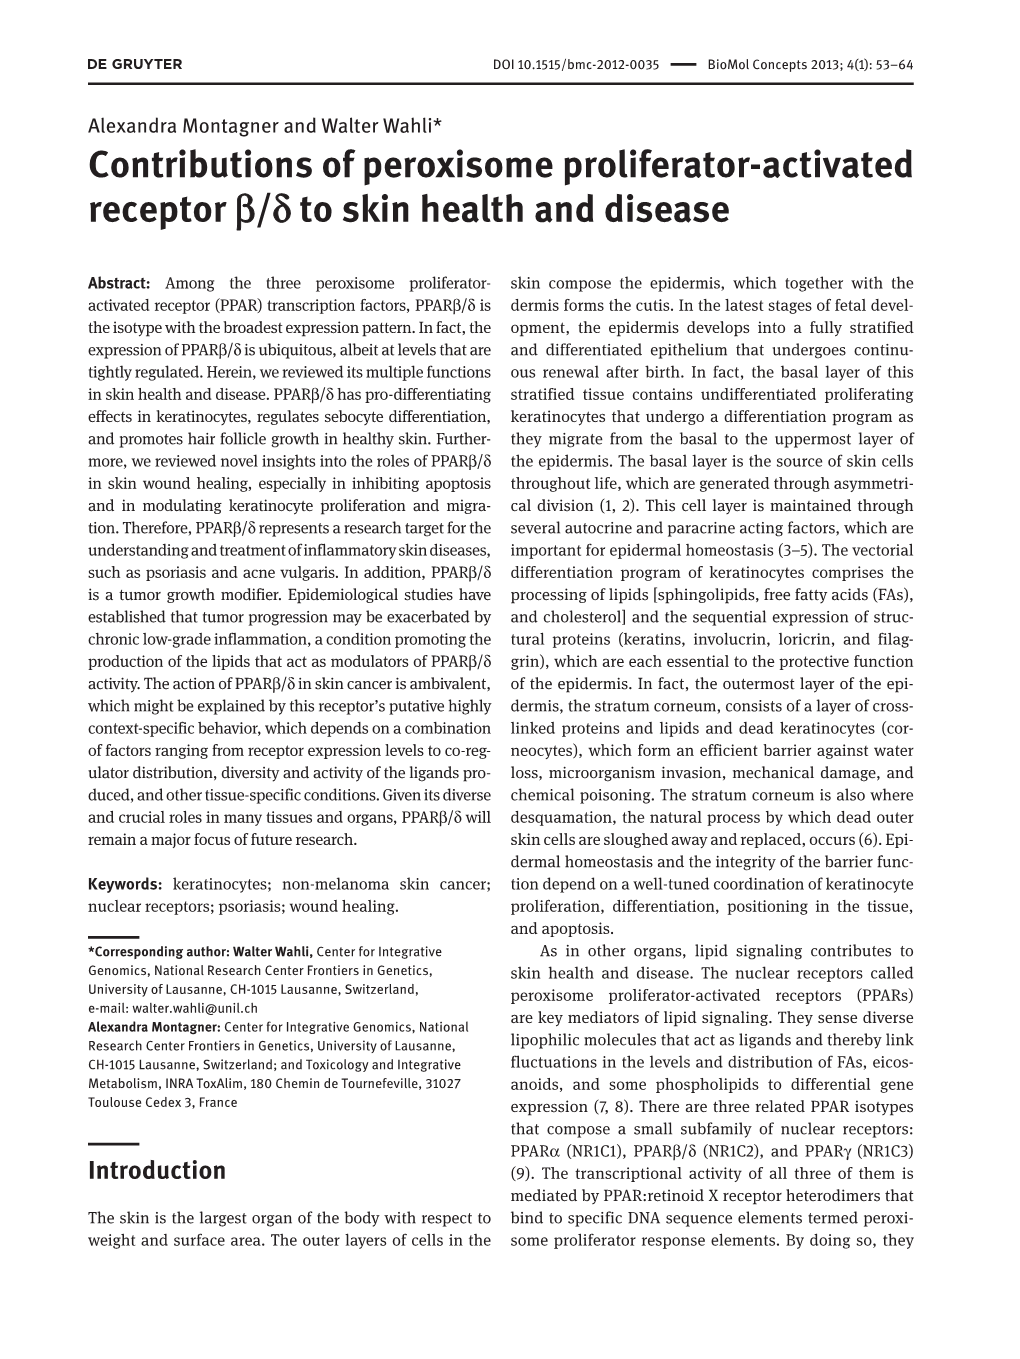 Contributions of Peroxisome Proliferator-Activated Receptor Β /Δ to Skin Health and Disease